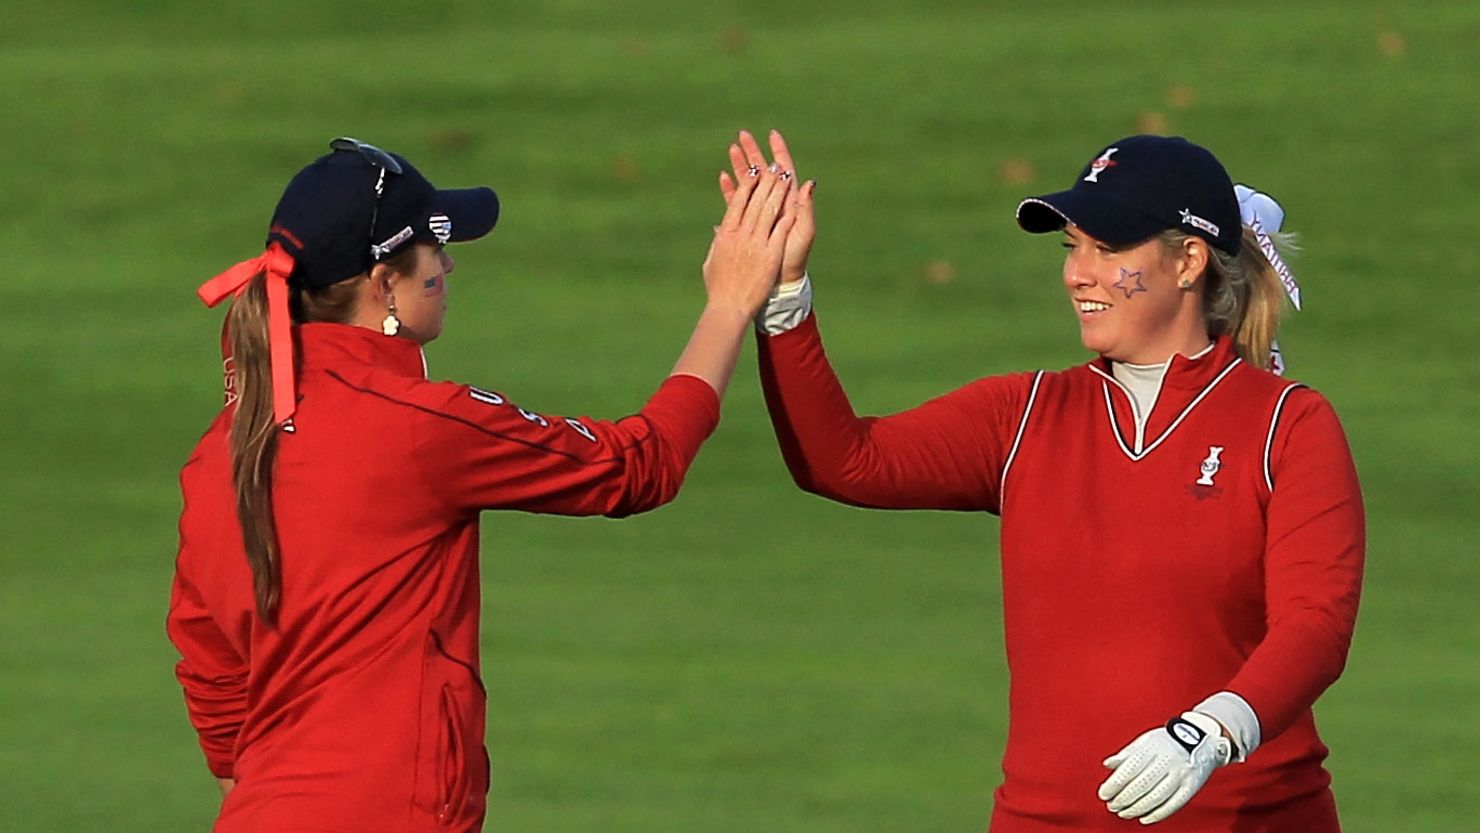 U.S. golfers Brittany Lincicome and Paula Creamer celebrate on the 16th hole during the afternoon fourballs.